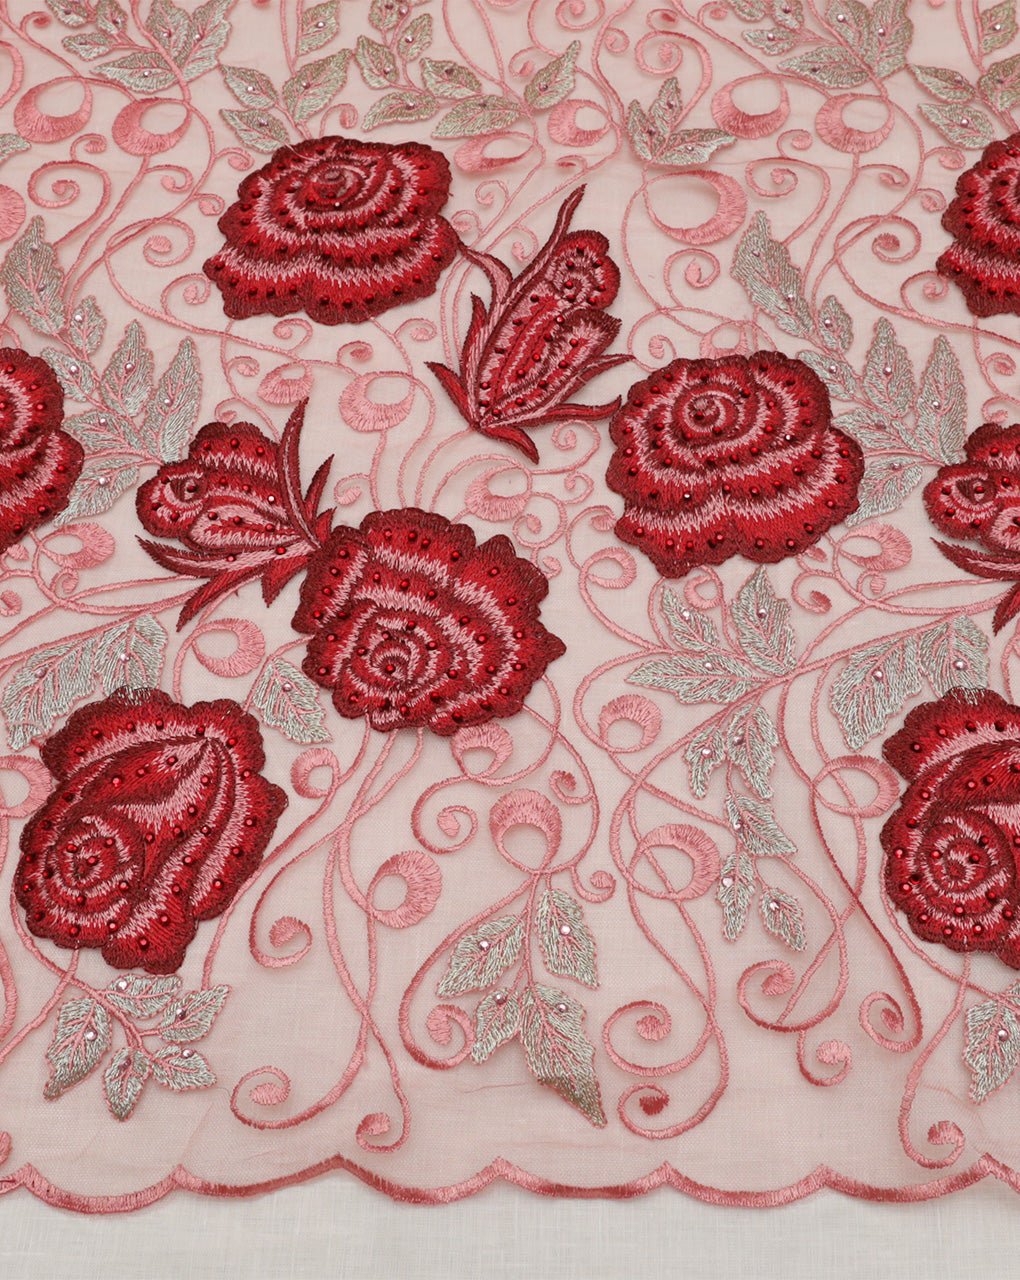 FLORAL EMBROIDERY POLYESTER NET DESIGNER FABRIC (WIDTH 52 INCHES)